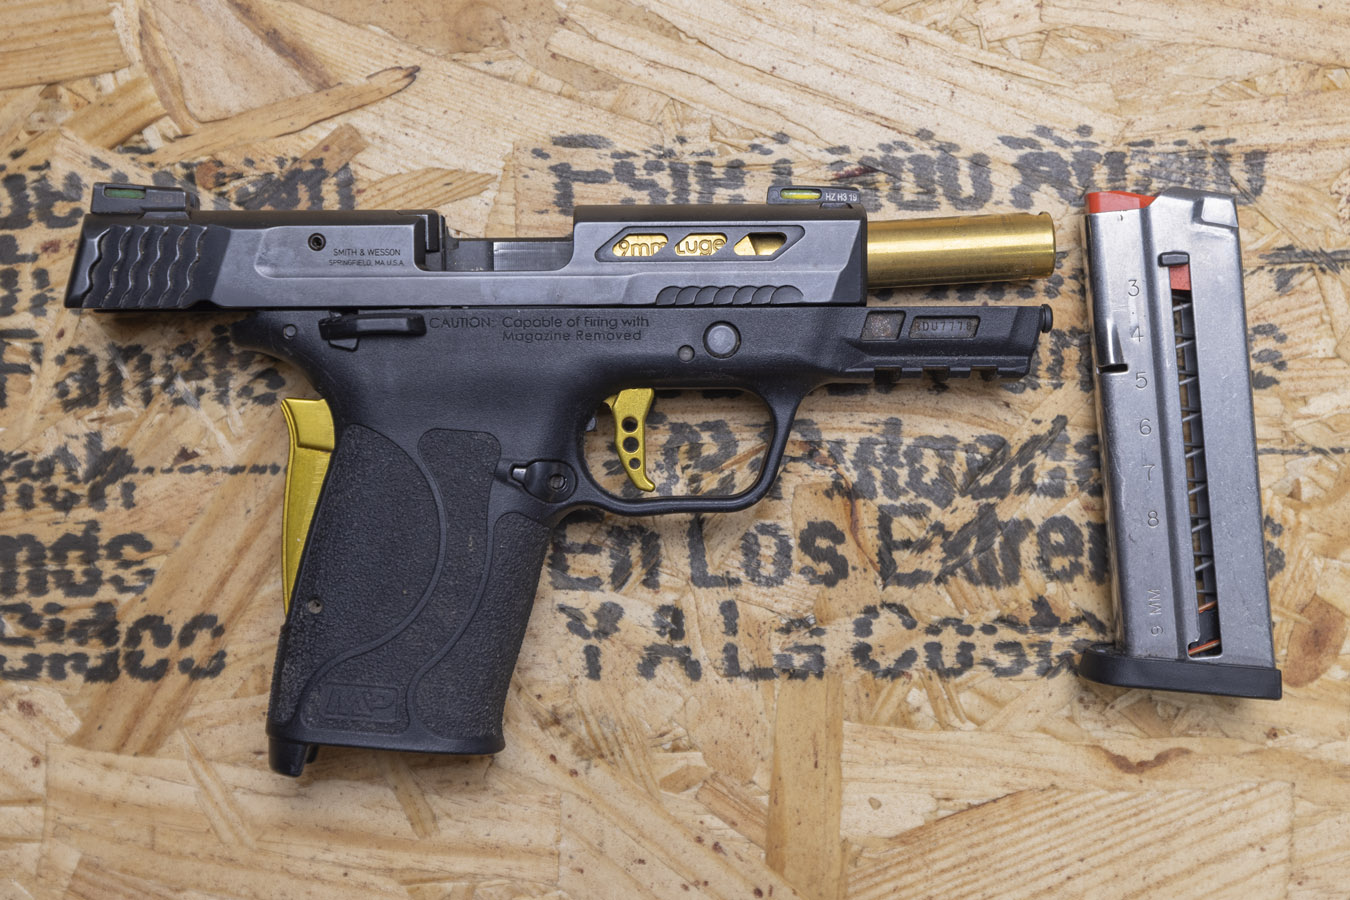 MP9 SHIELD EZ M2.0 9MM POLICE TRADE-IN PISTOL WITH GOLD ACCENTS